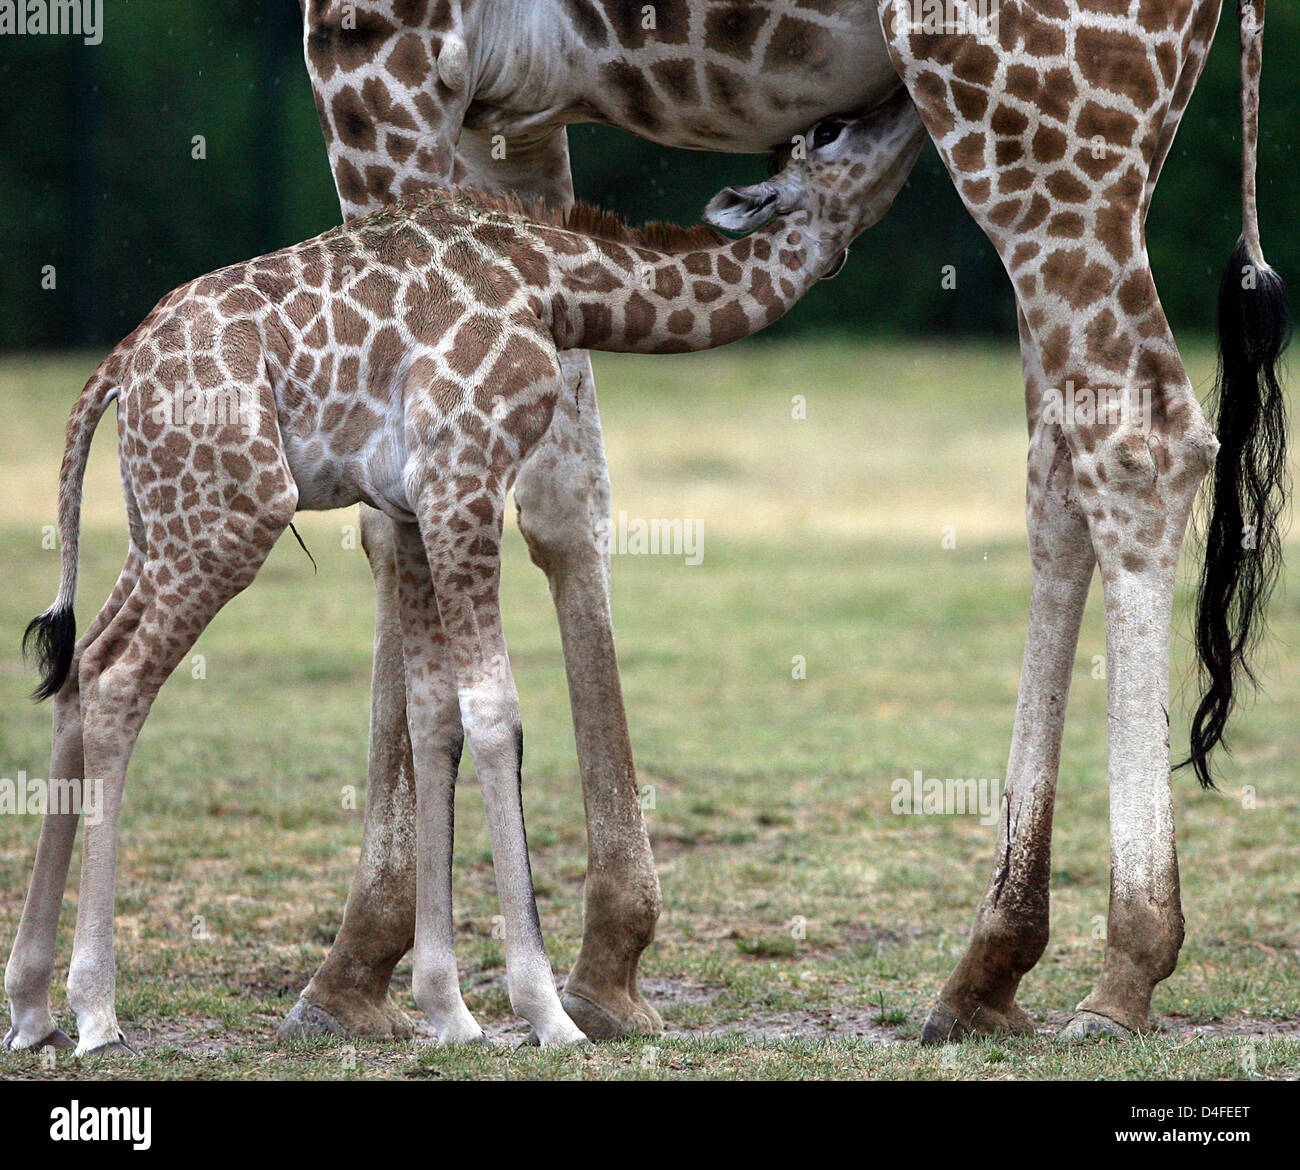 The Ugandan giraffe cub 'Ulla' is pictured with her mother 'Lotti' in the zoo in Berlin, Germany, 04 July 2008. The giraffe was born on 19 June 2008 in the zoo. Photo: KLAUS-DIETMAR GABBERT Stock Photo